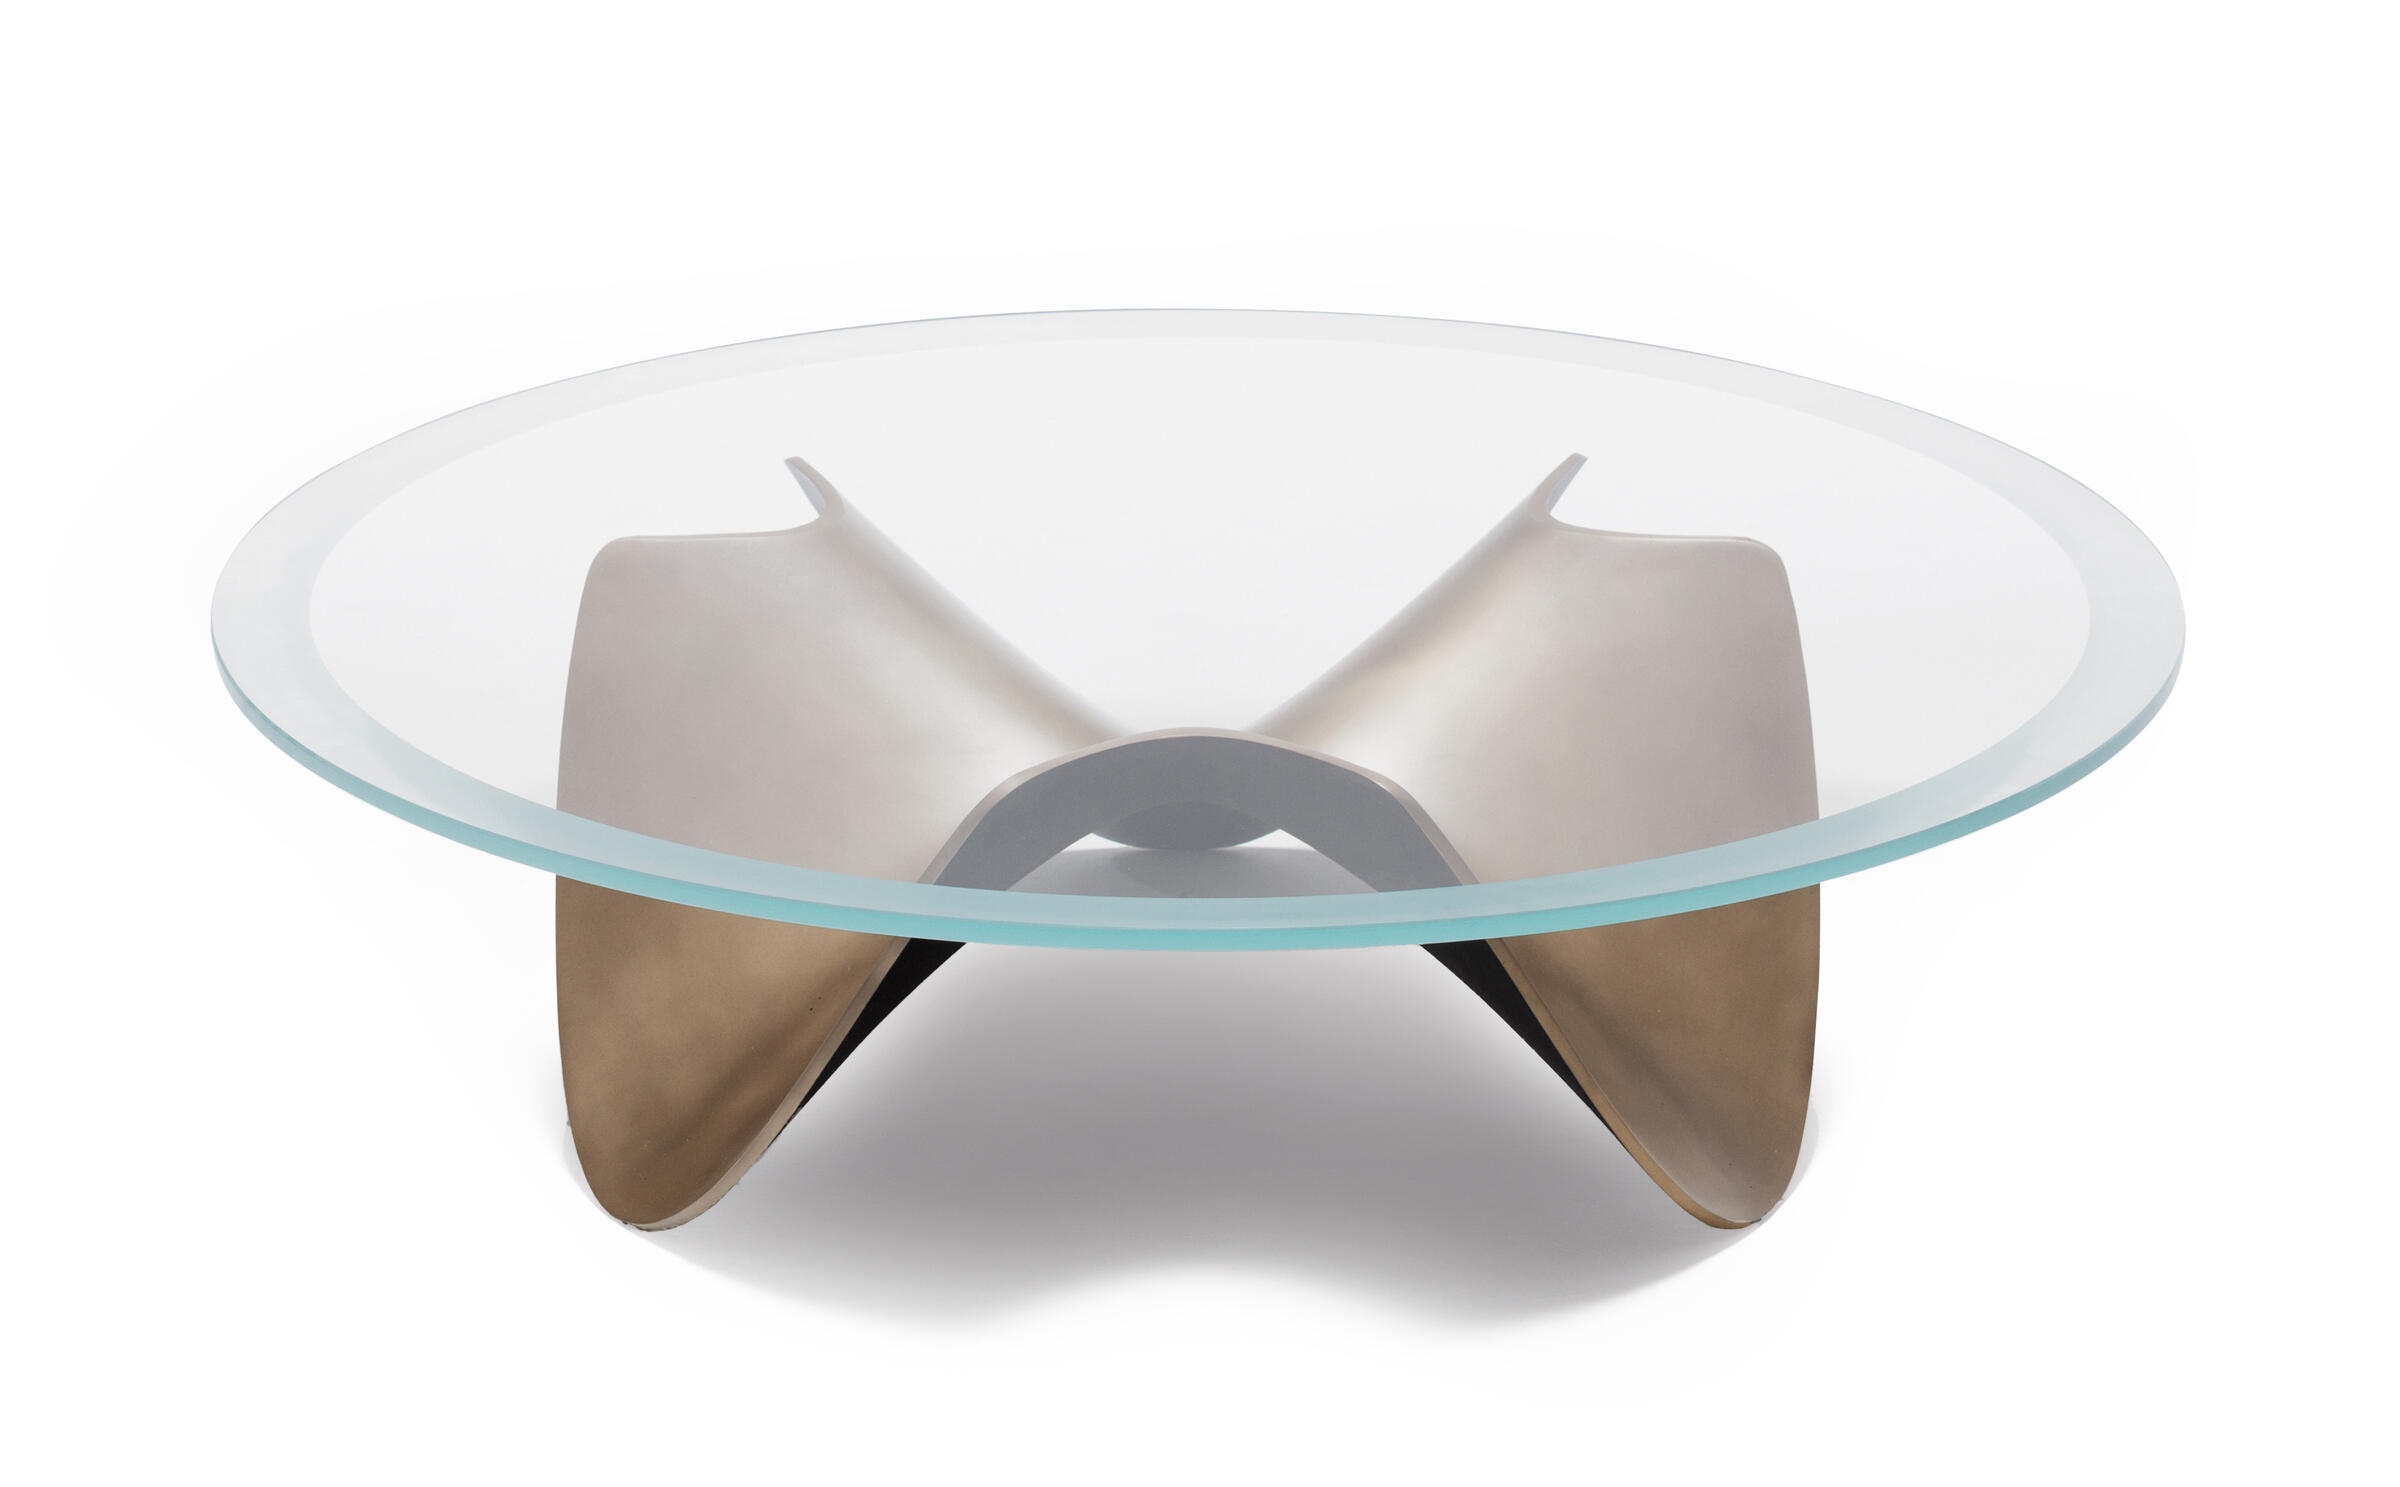 Atom Cocktail Table